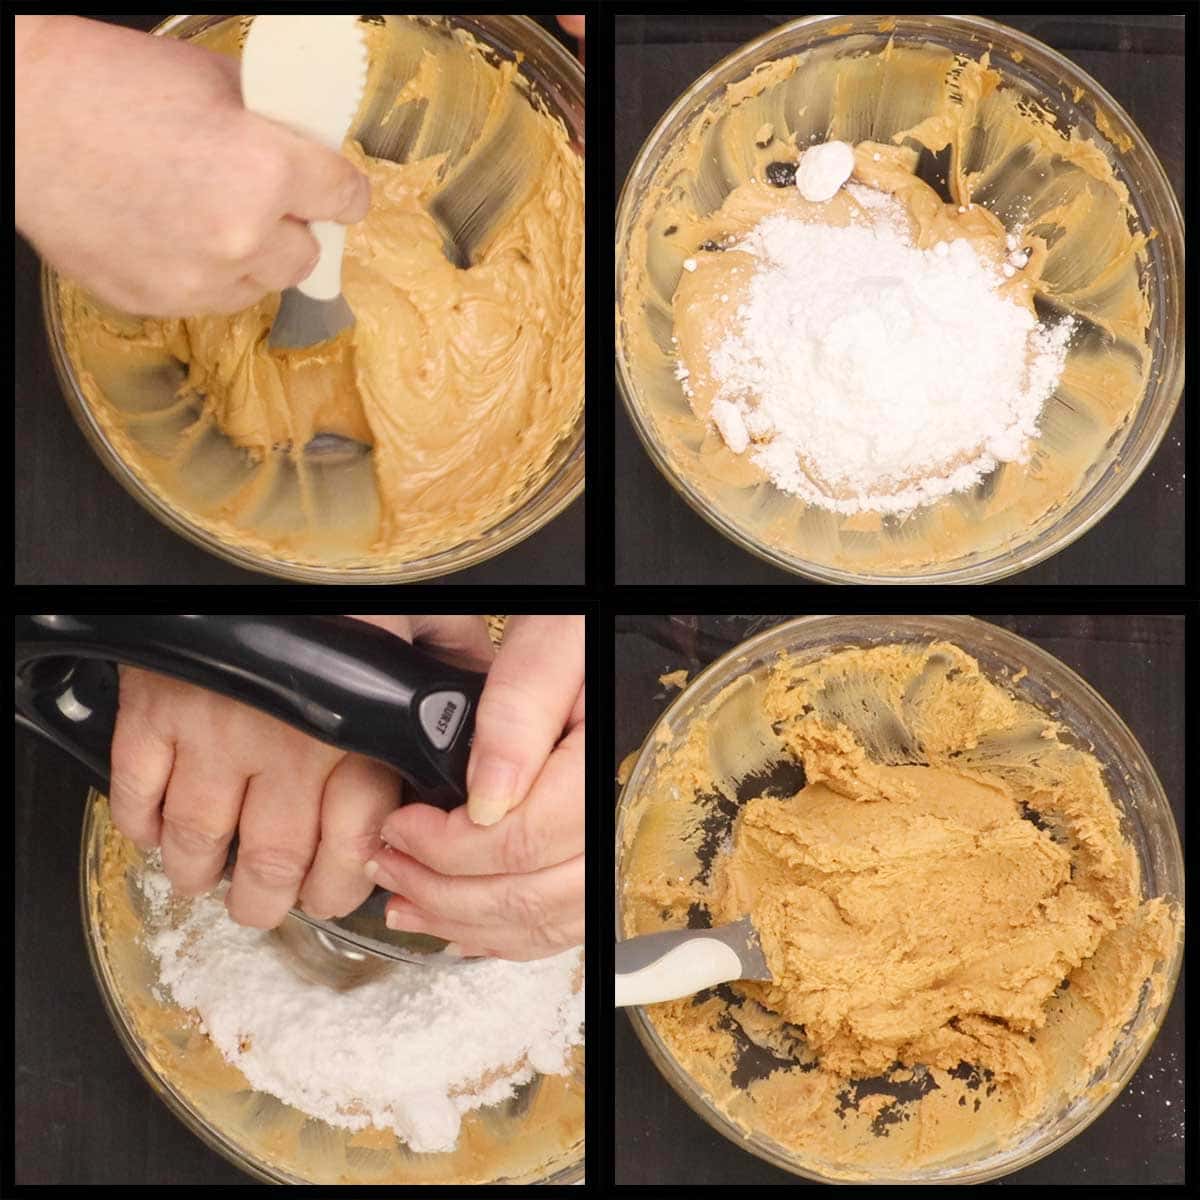 adding the powdered sugar to the peanut butter mixture and blending with a hand mixer.